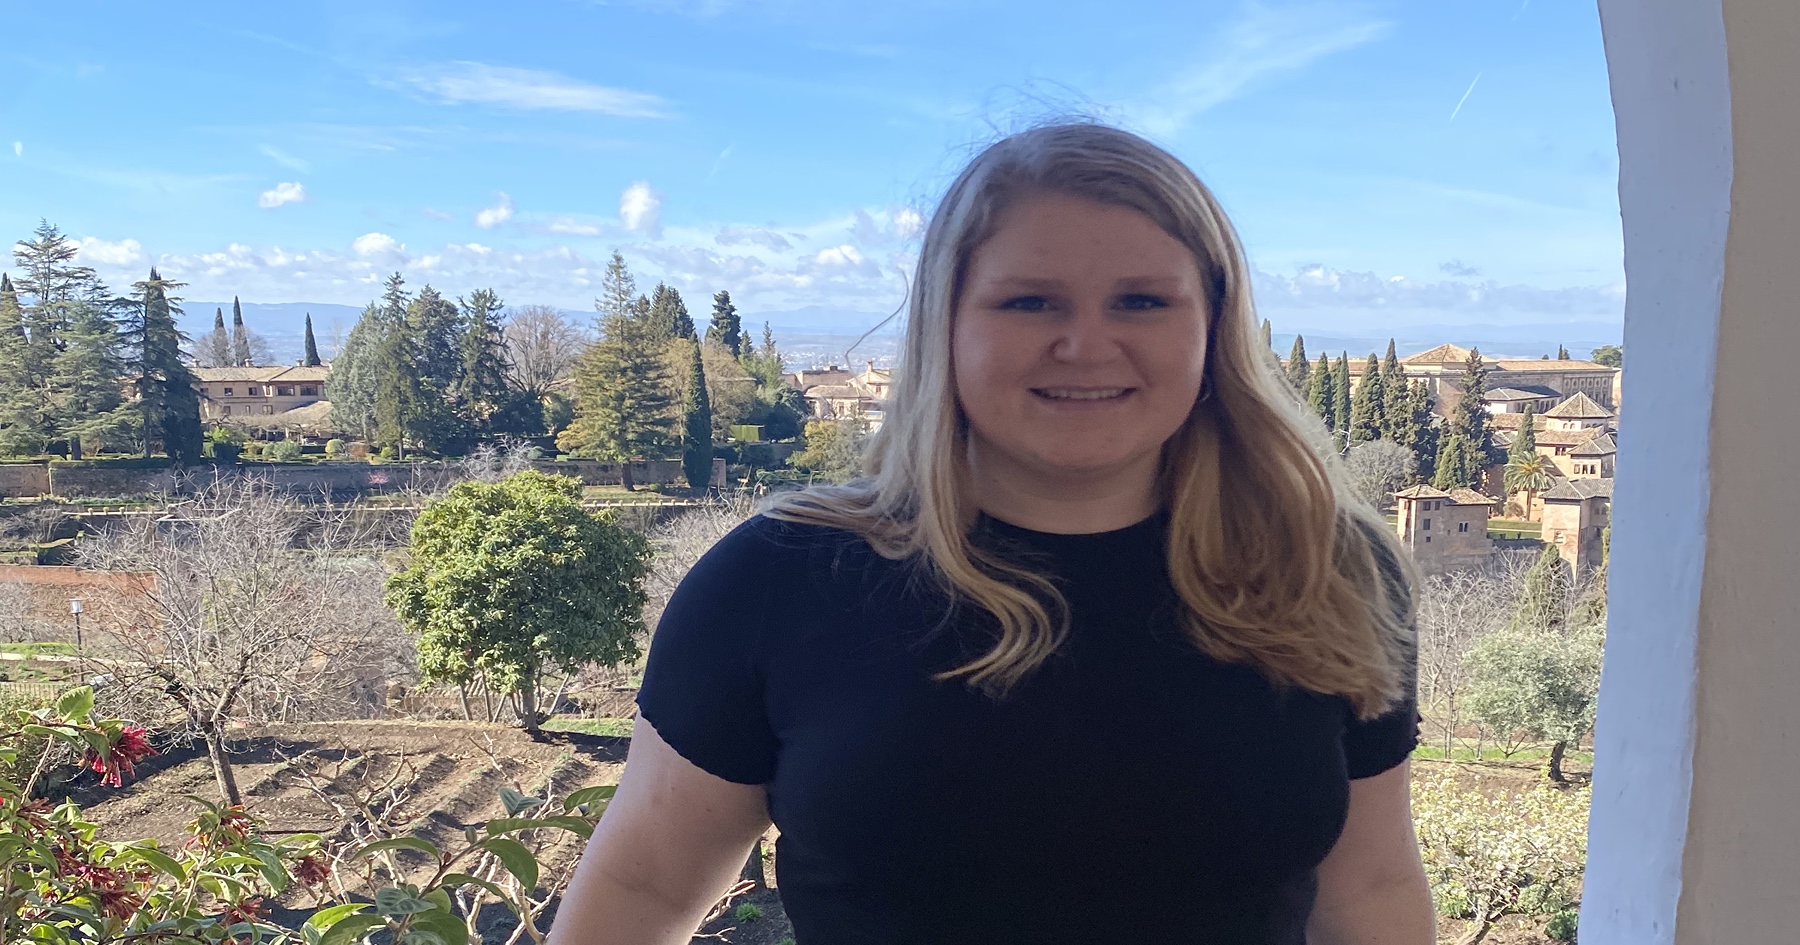 Holly Shaver, Purdue Student studies abroad in Spain